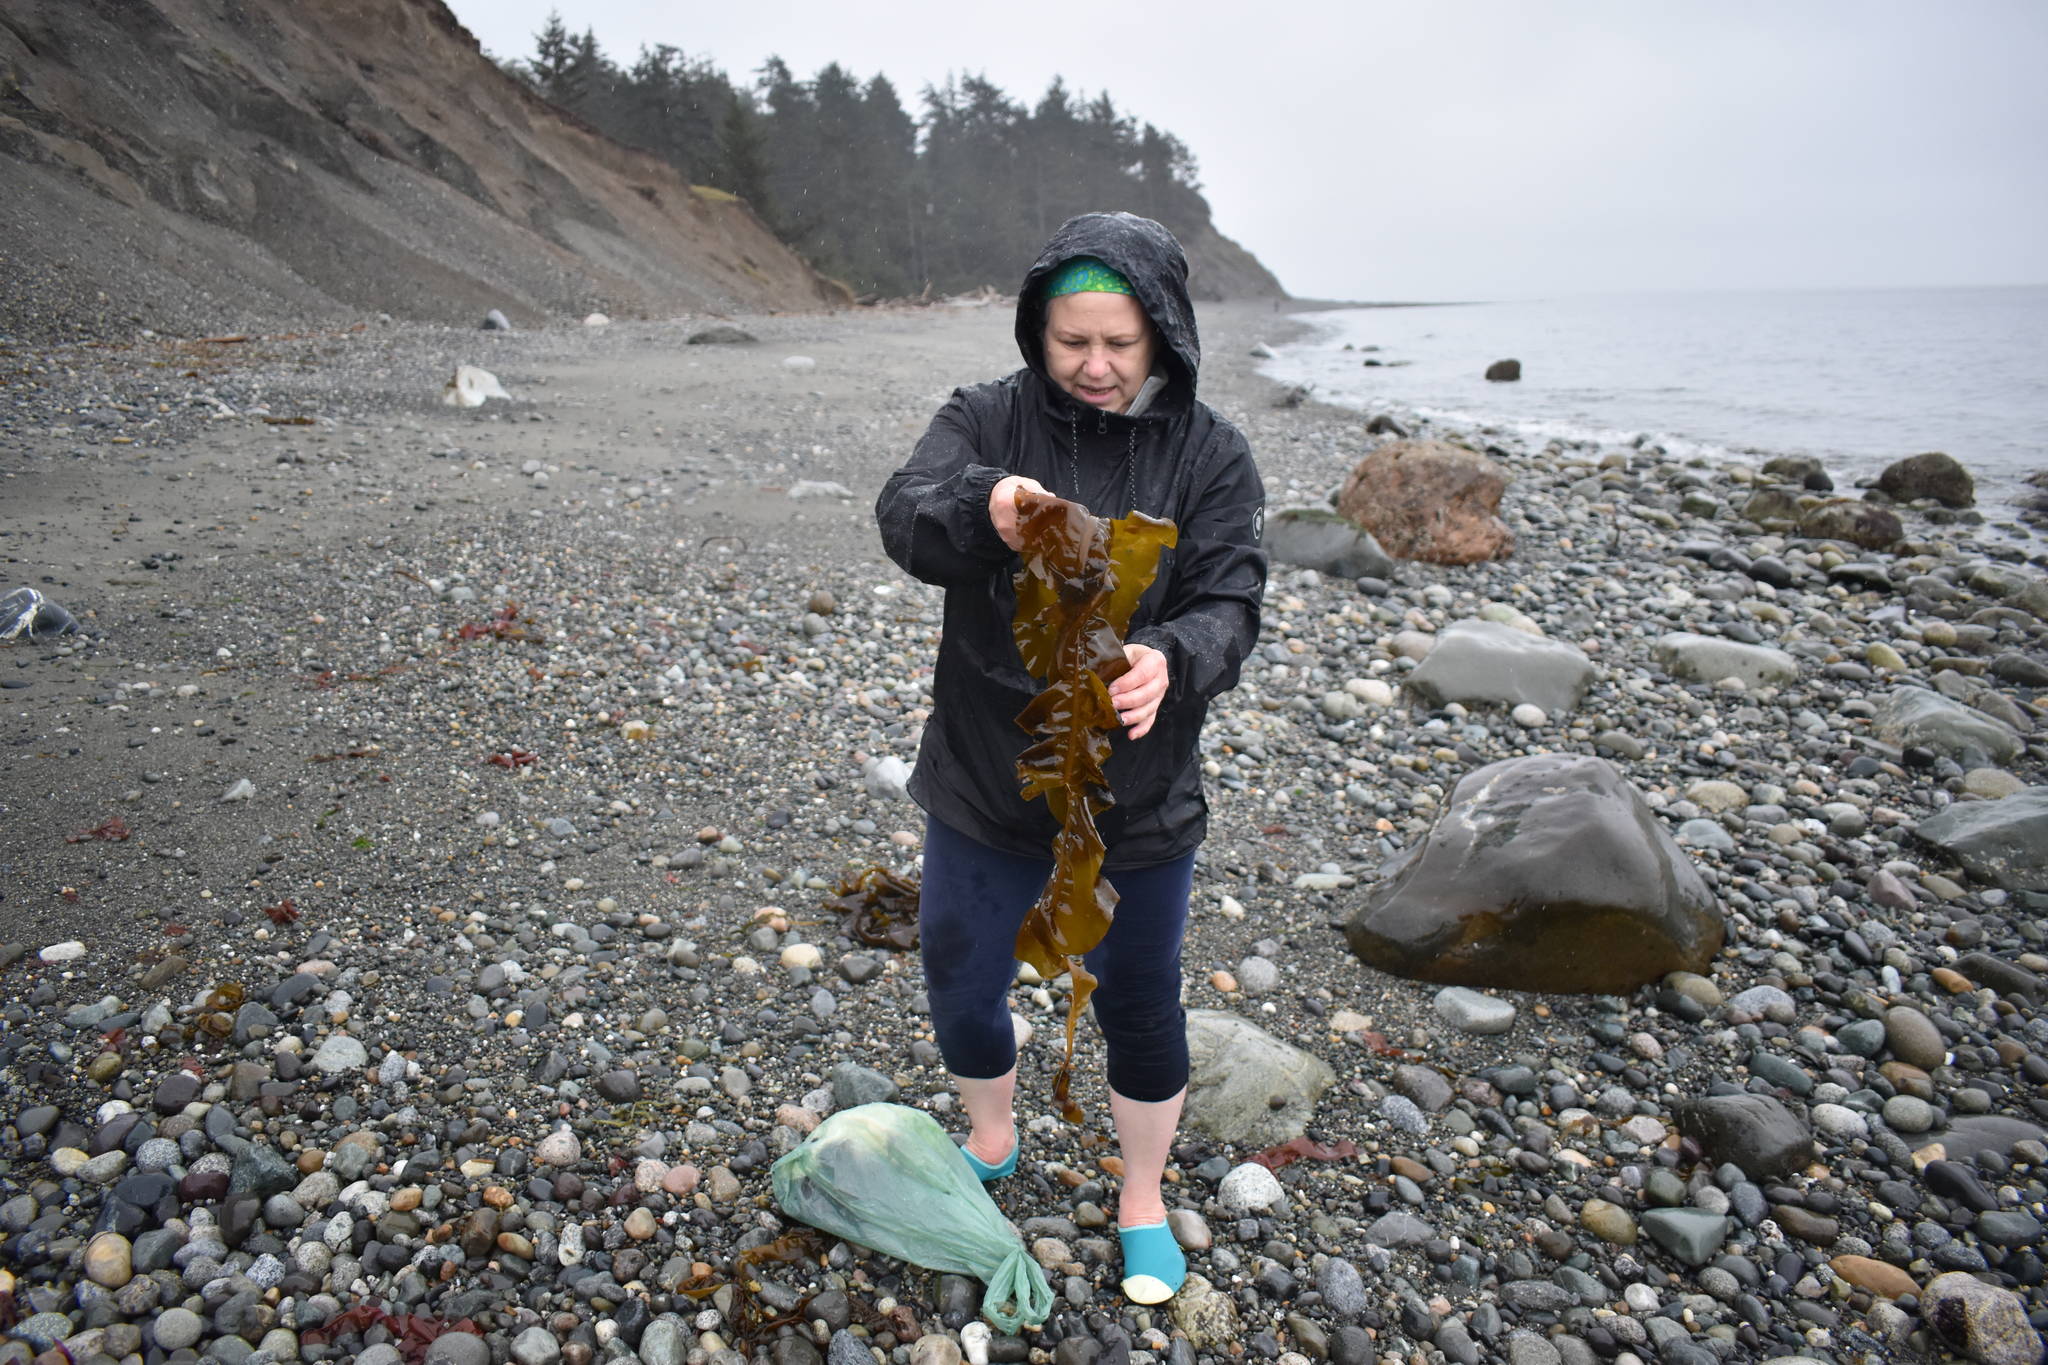 Photo by Emily Gilbert/Whidbey News-Times
Karen Achabel holds up a piece of kelp at Fort Ebey State Park on April 24. Seaweed harvesting at state parks is limited to April 15-May 15, although seaweed can be harvested from non-state park land at other times during the year.